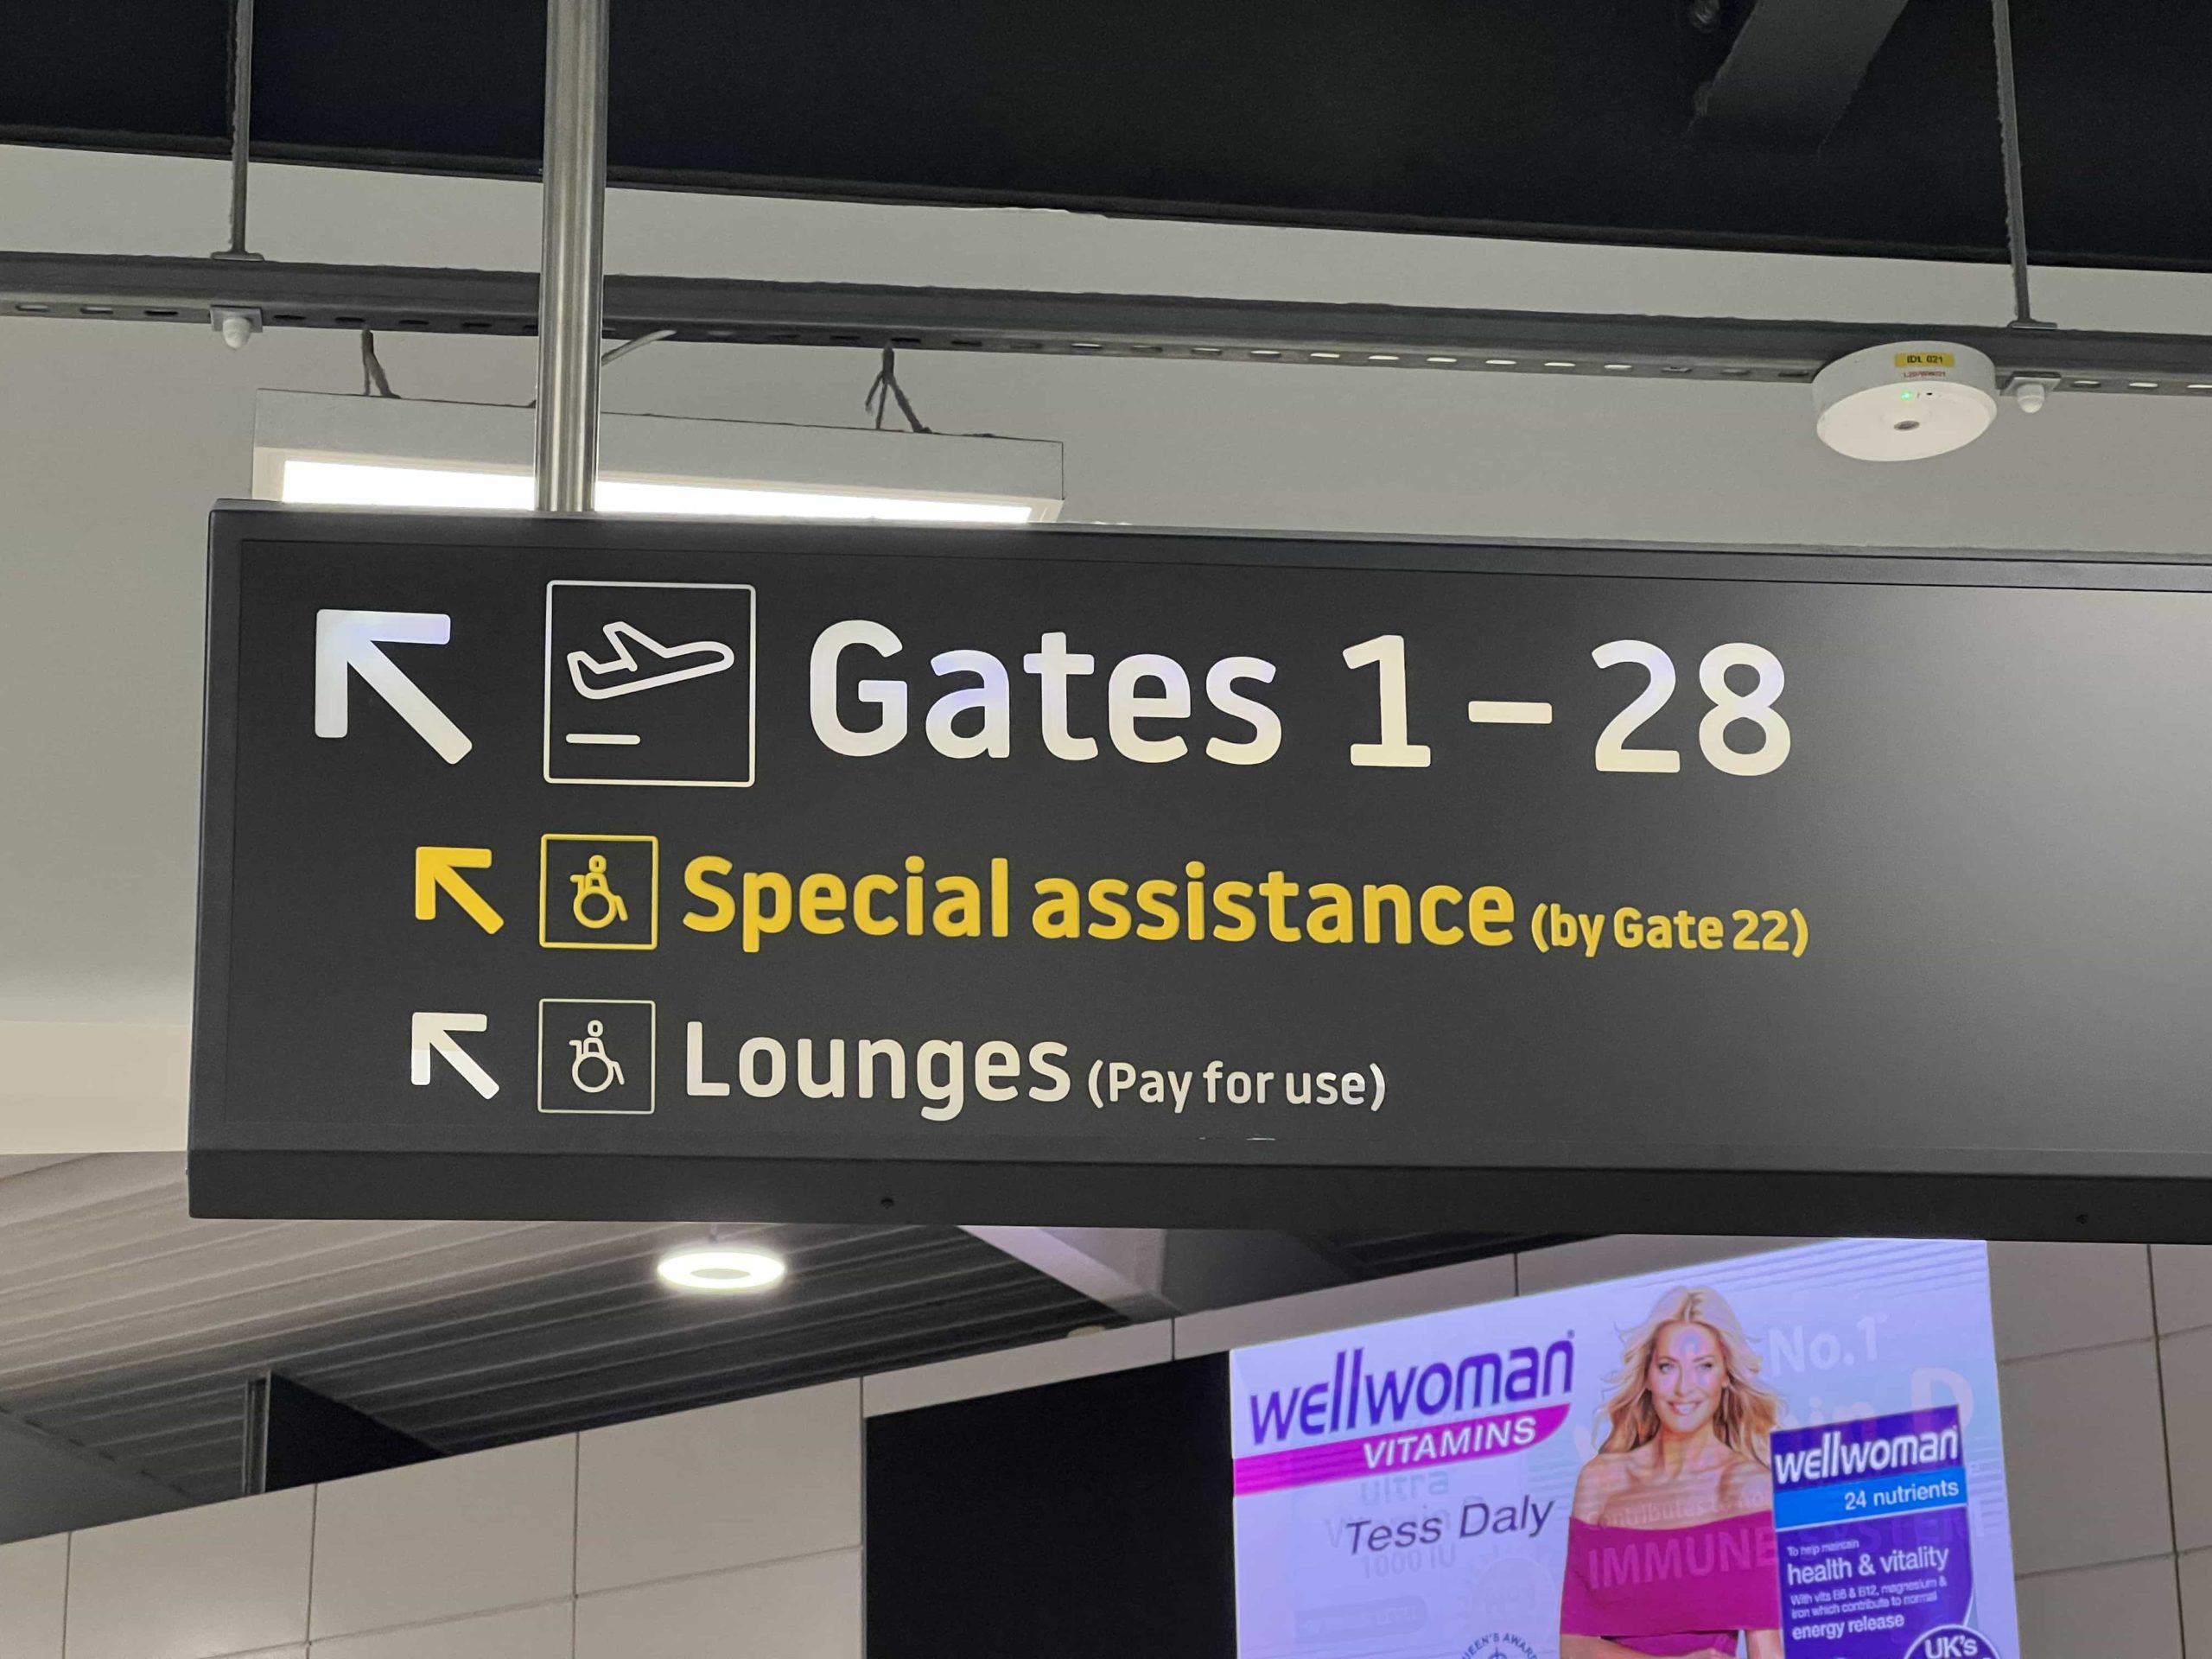 Overhead signage in an airport terminal which directs to gates, special assistance, and lounges